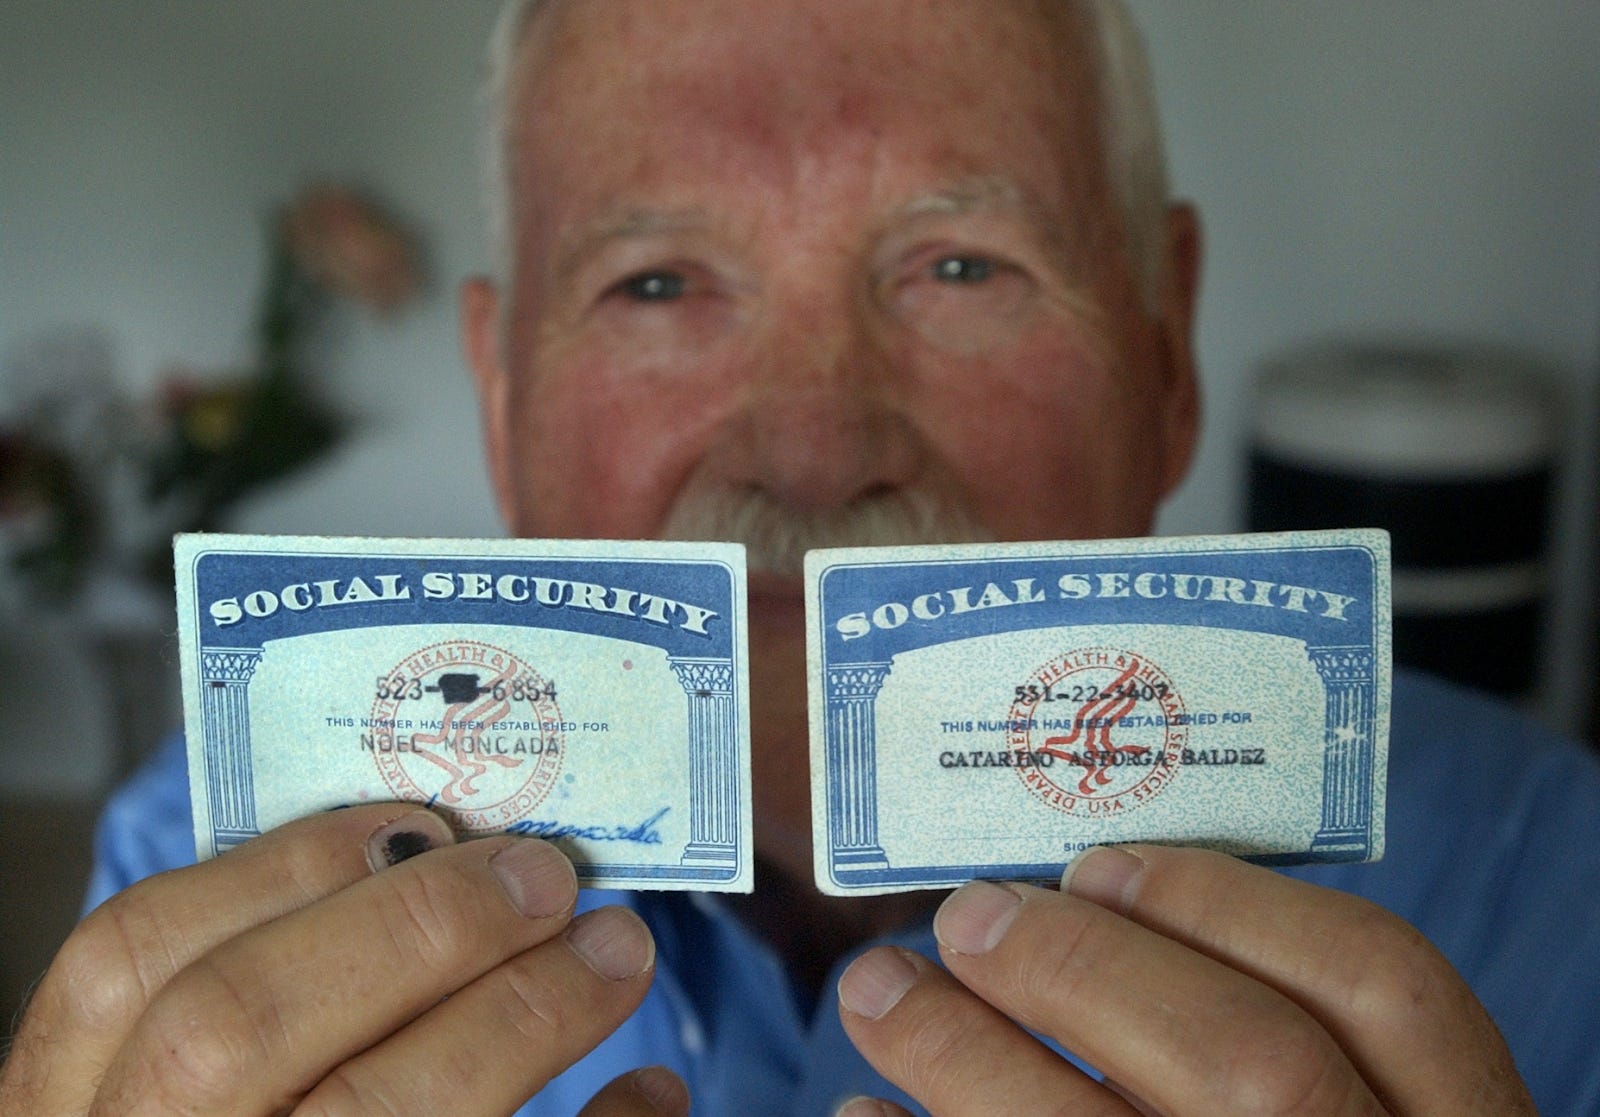 Florida Man Fights for Rights: A 60-Year Journey to Prove U.S. Citizenship for Social Security